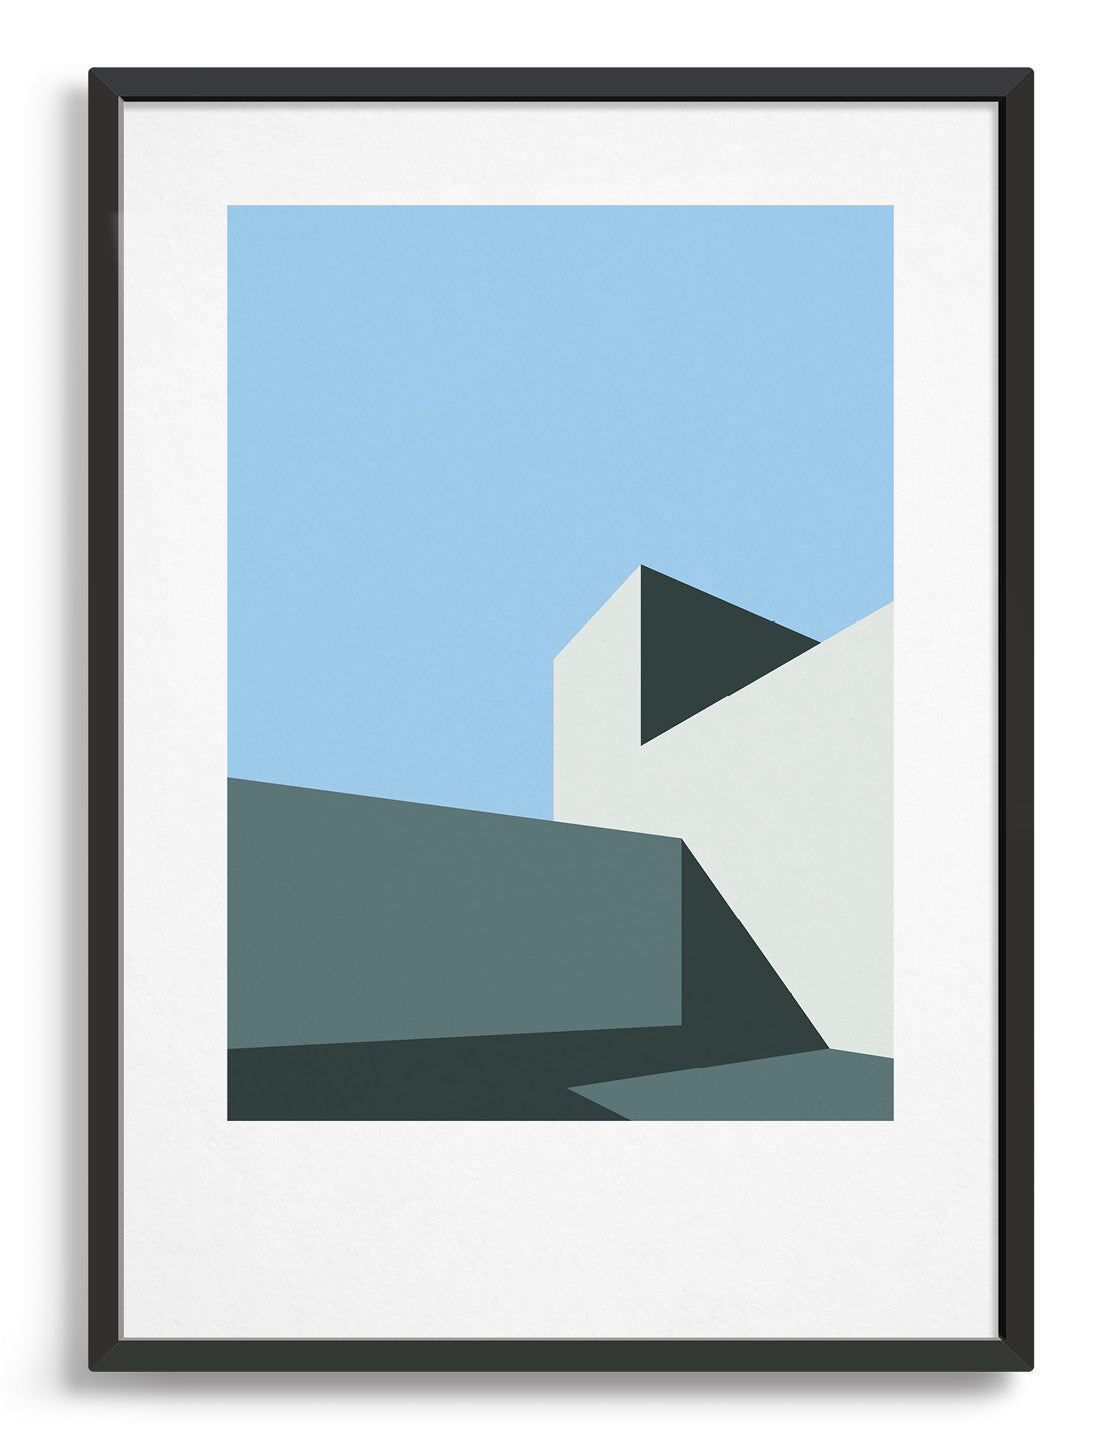 Minimal architecture inspired wall art / Abstract geometric poster for a gallery wall